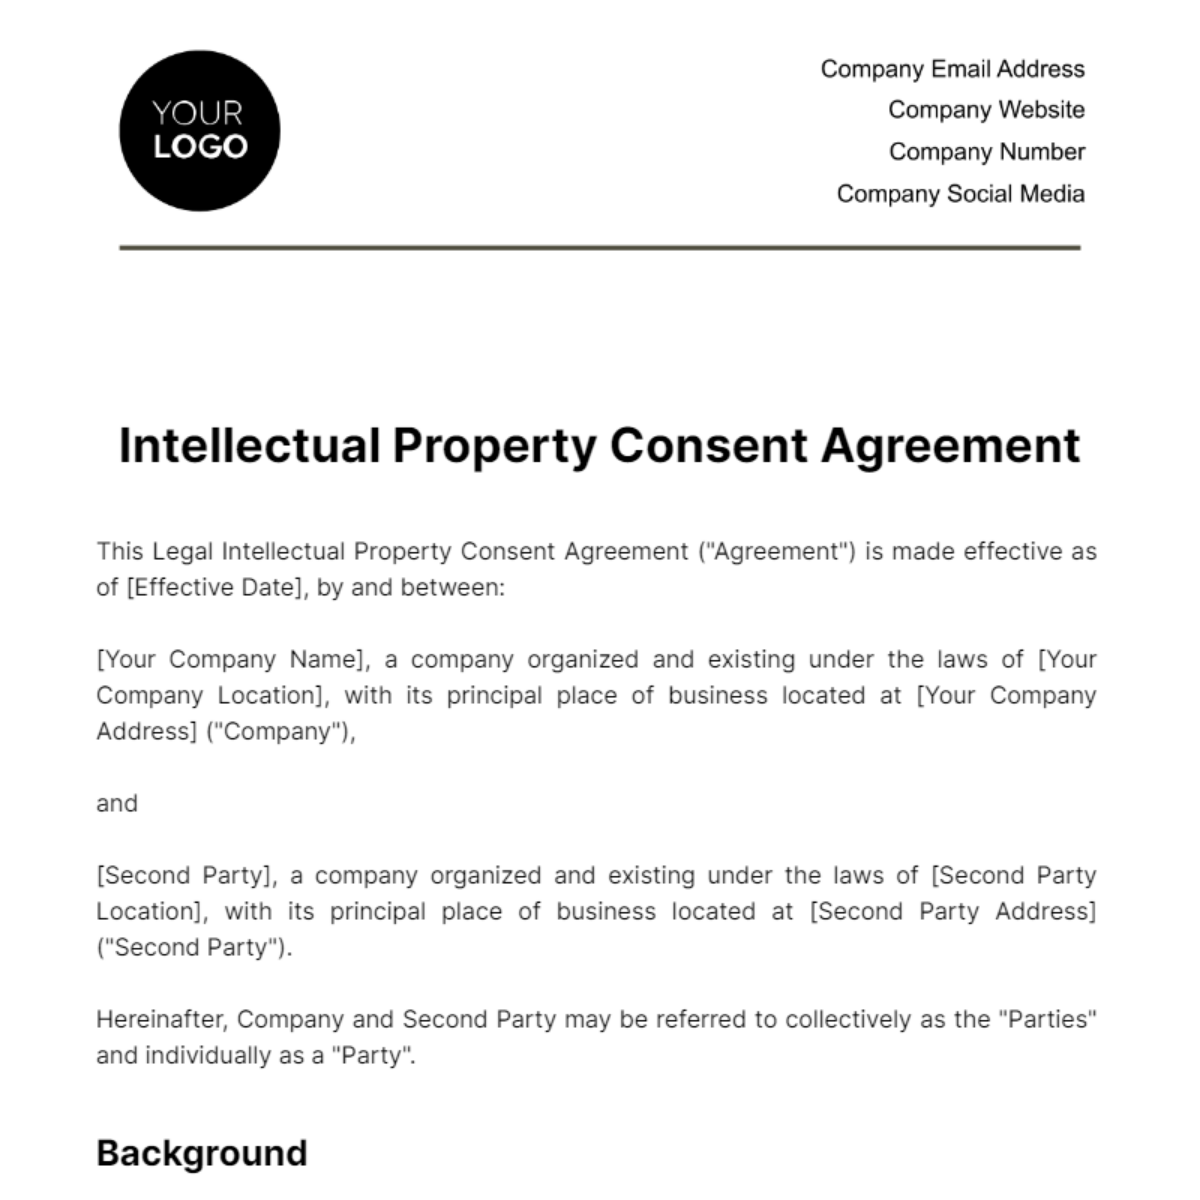 Free Legal Intellectual Property Consent Agreement Template